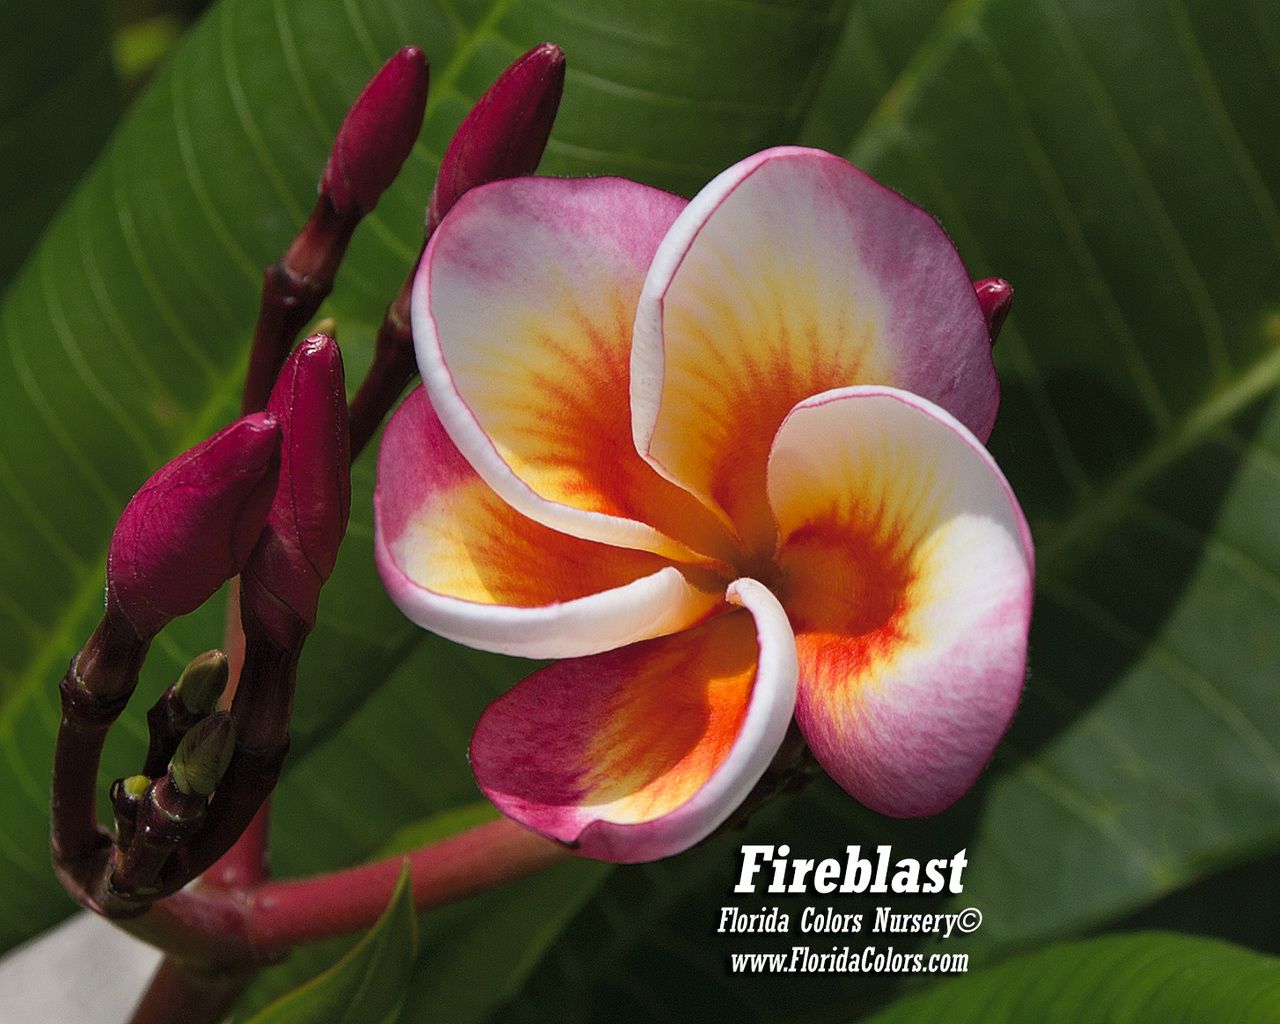 Fireblast (grafted with roots) Plumeria Questions & Answers